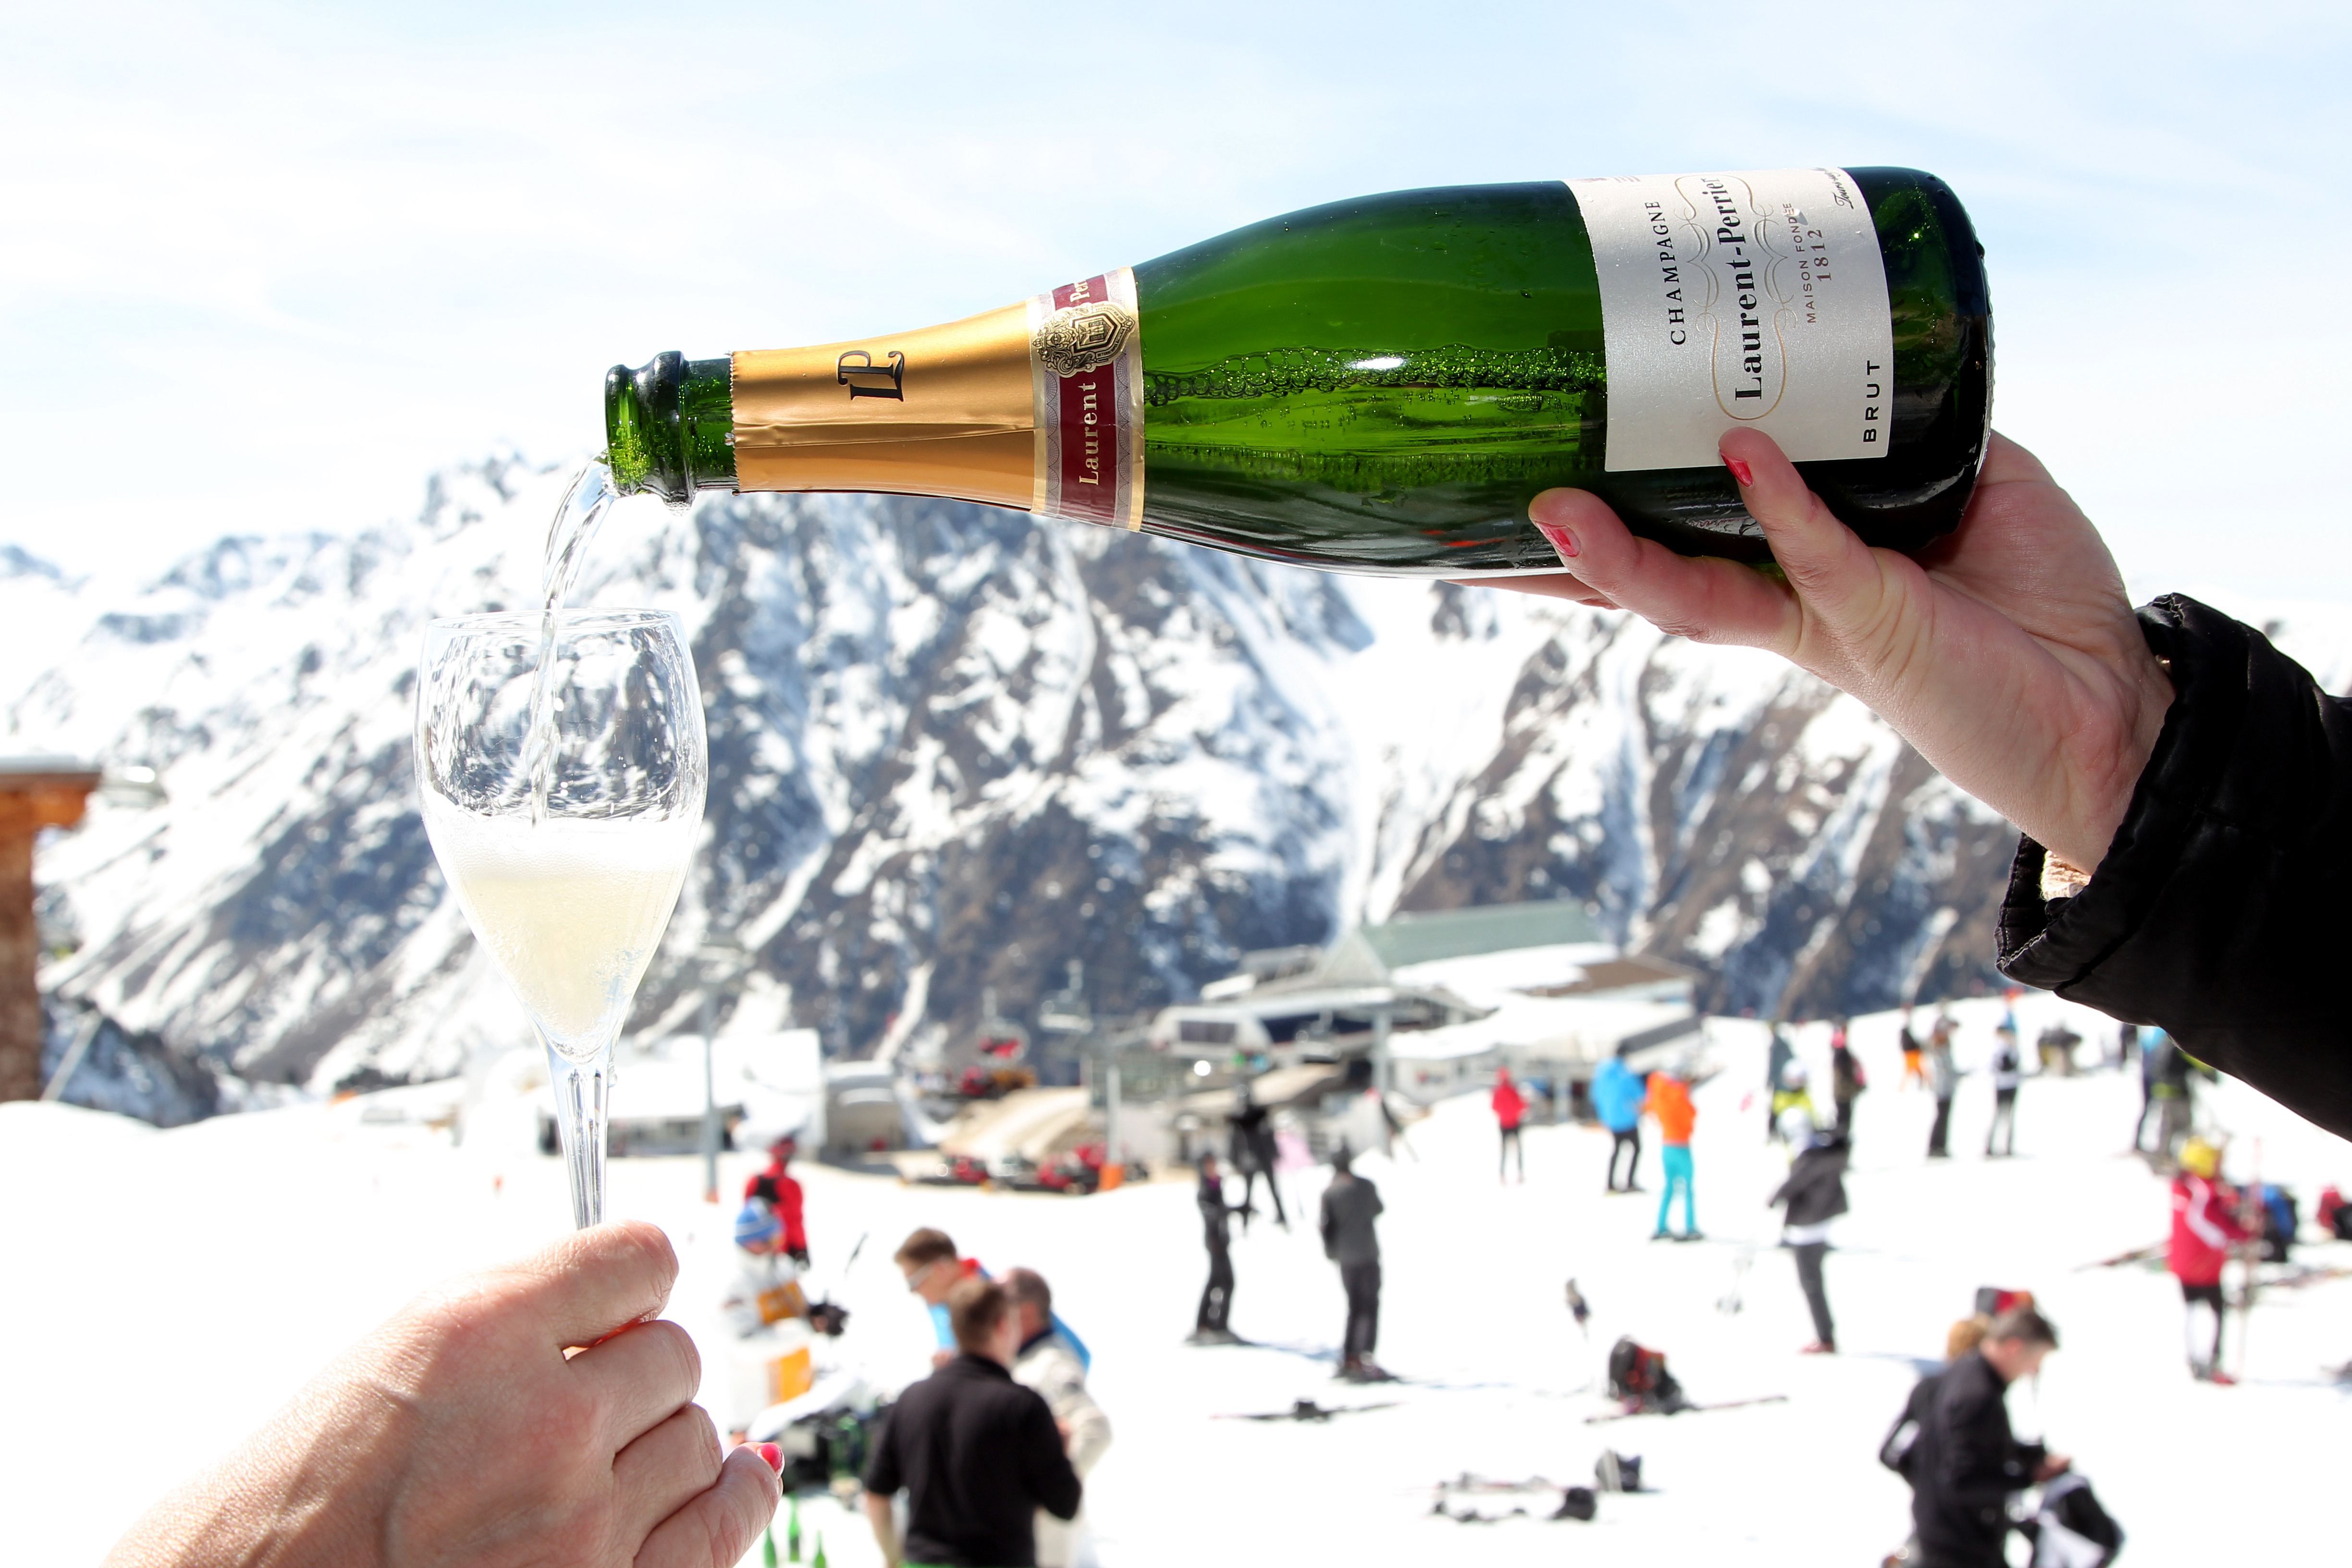 Favorite Champagne - What Your Favorite Champagne Brand Says About You